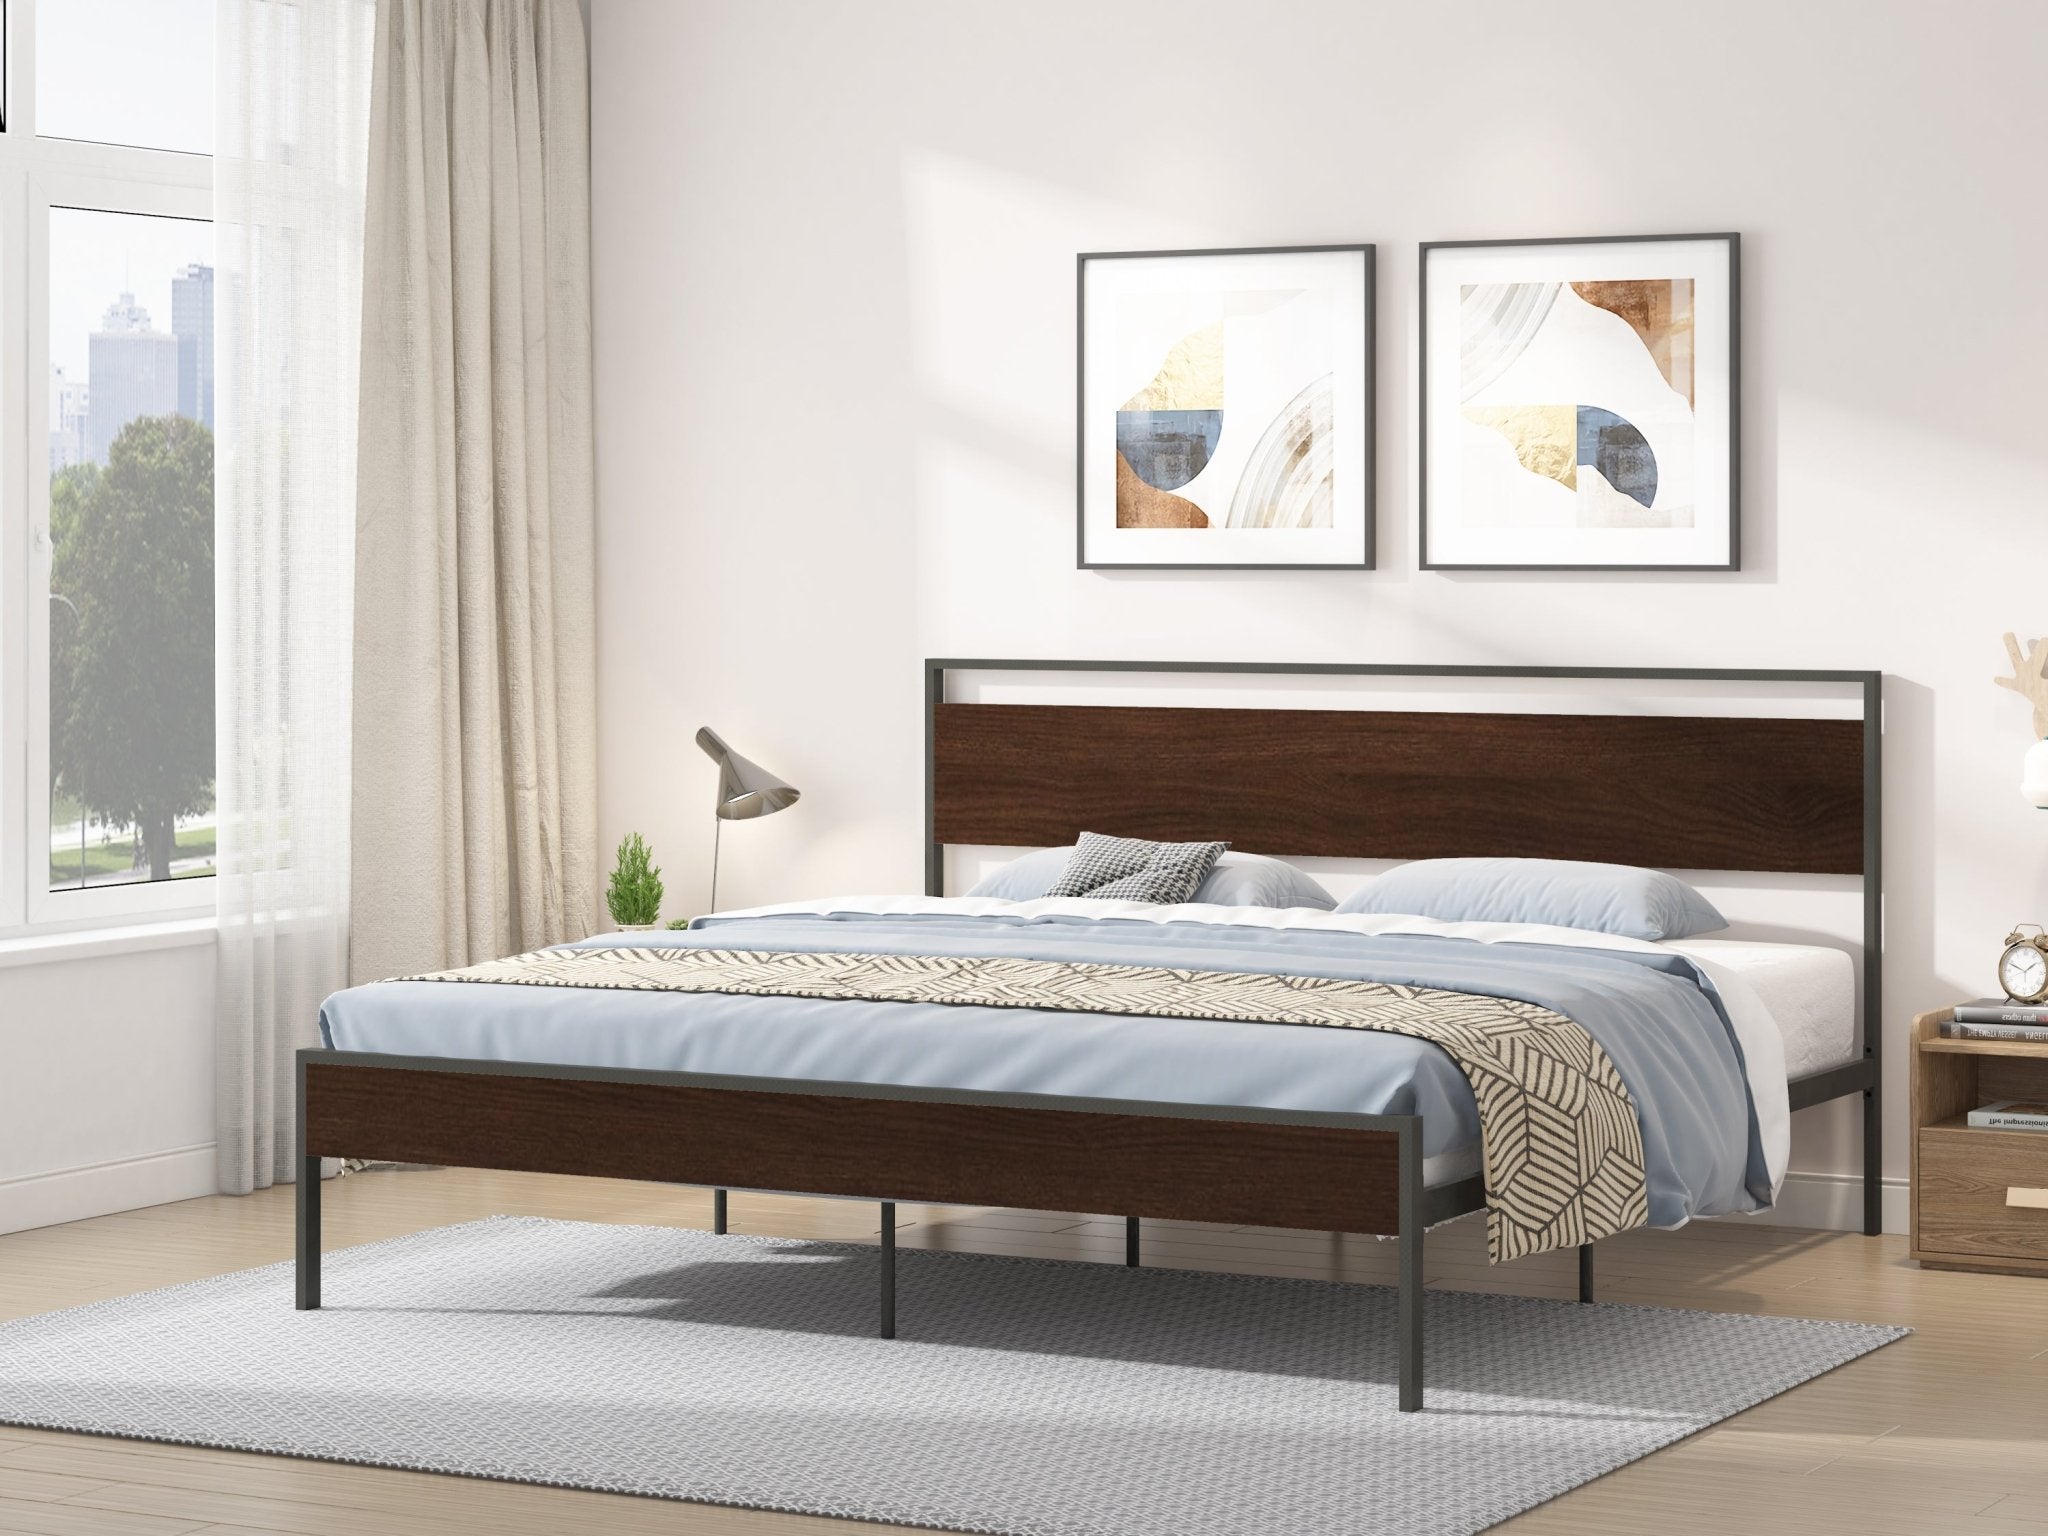 Ceres-Metal-King-Bed,-Black-with-Walnut-wood-Headboard-Beds-&-Bed-Frames